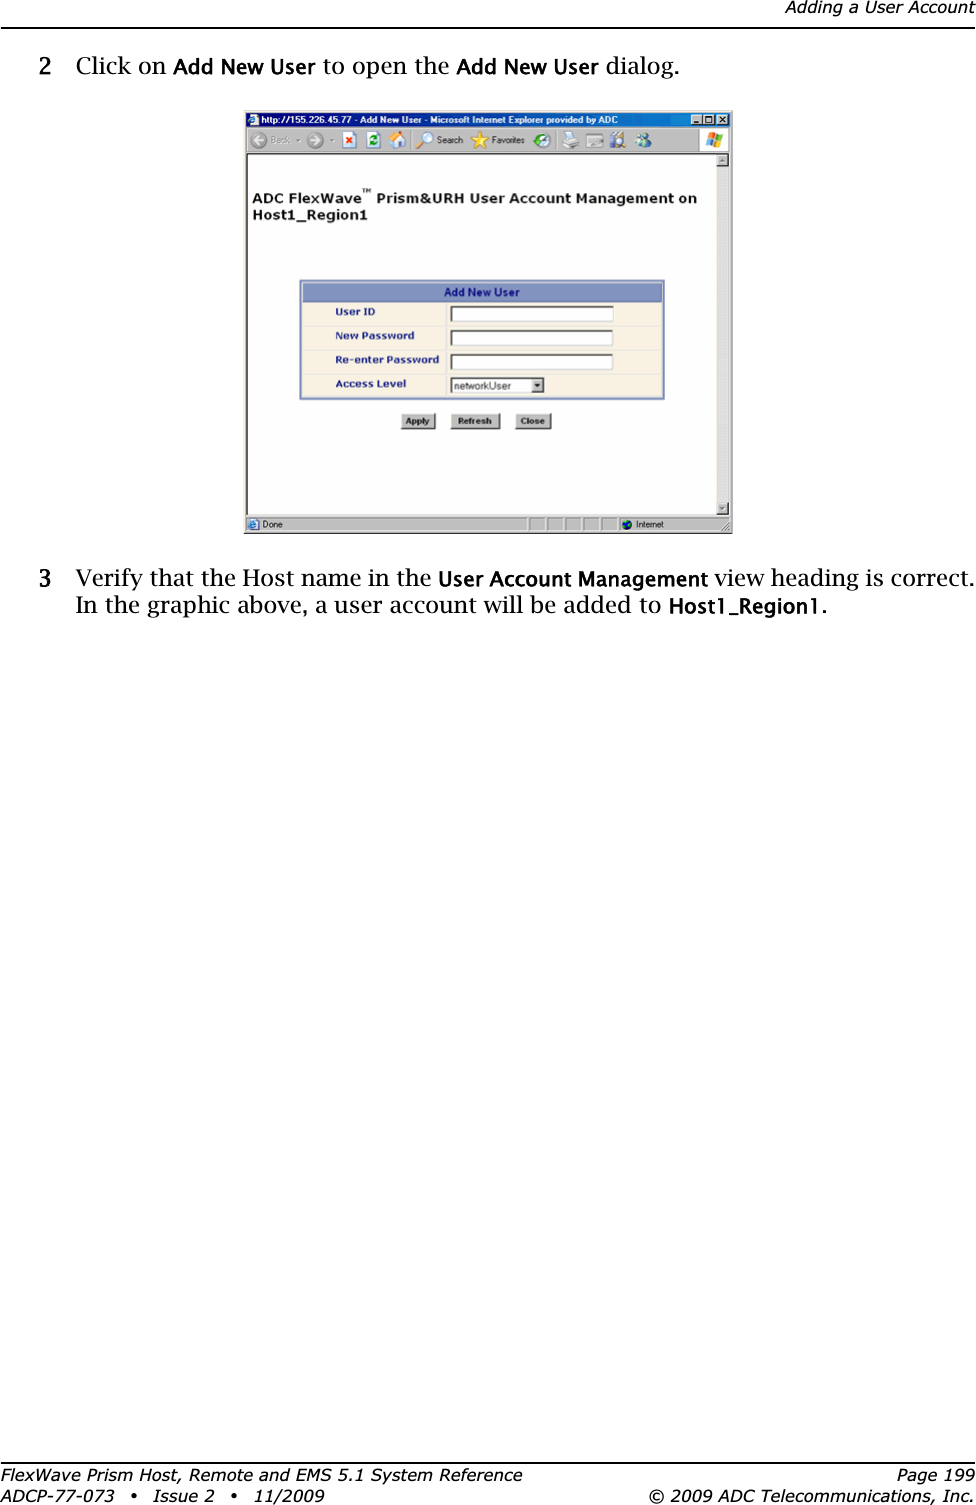 Adding a User AccountFlexWave Prism Host, Remote and EMS 5.1 System Reference Page 199ADCP-77-073 • Issue 2 • 11/2009 © 2009 ADC Telecommunications, Inc.22 Click on Add New User to open the Add New User dialog.33 Verify that the Host name in the User Account Management view heading is correct. In the graphic above, a user account will be added to Host1_Region1.